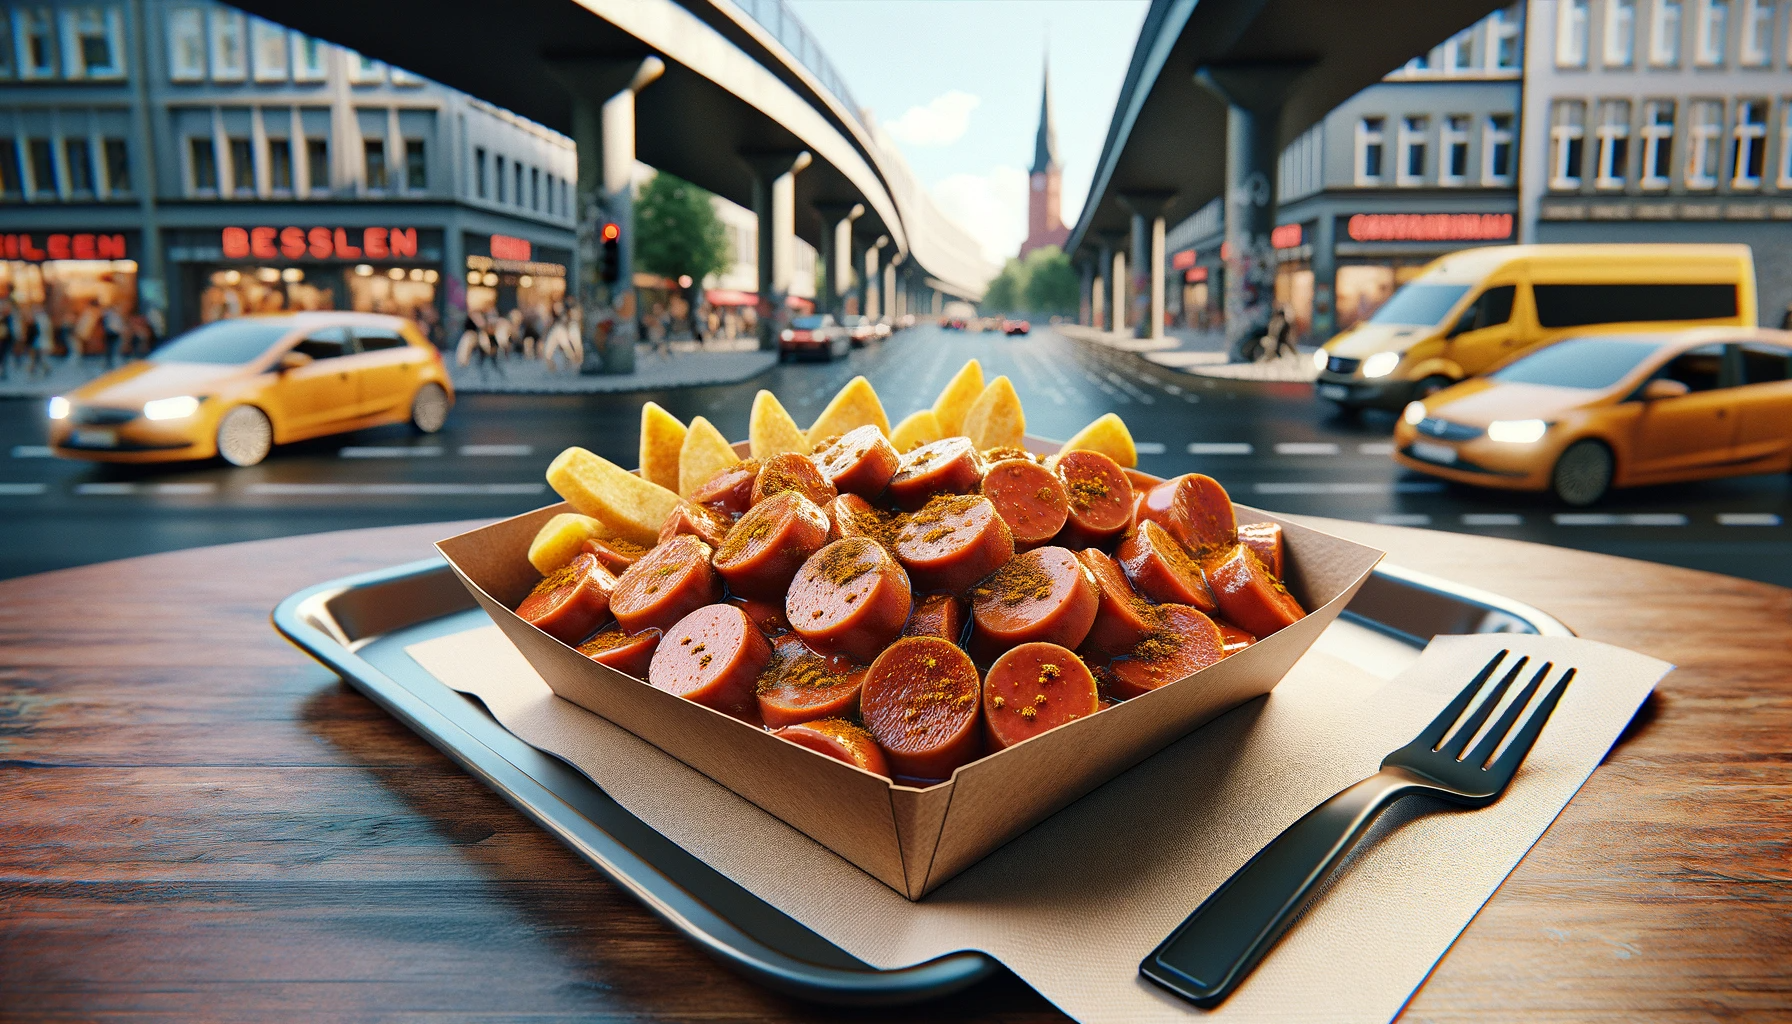 Currywurst sliced into round bite-sized pieces, sprinkled with curry powder in Berlin